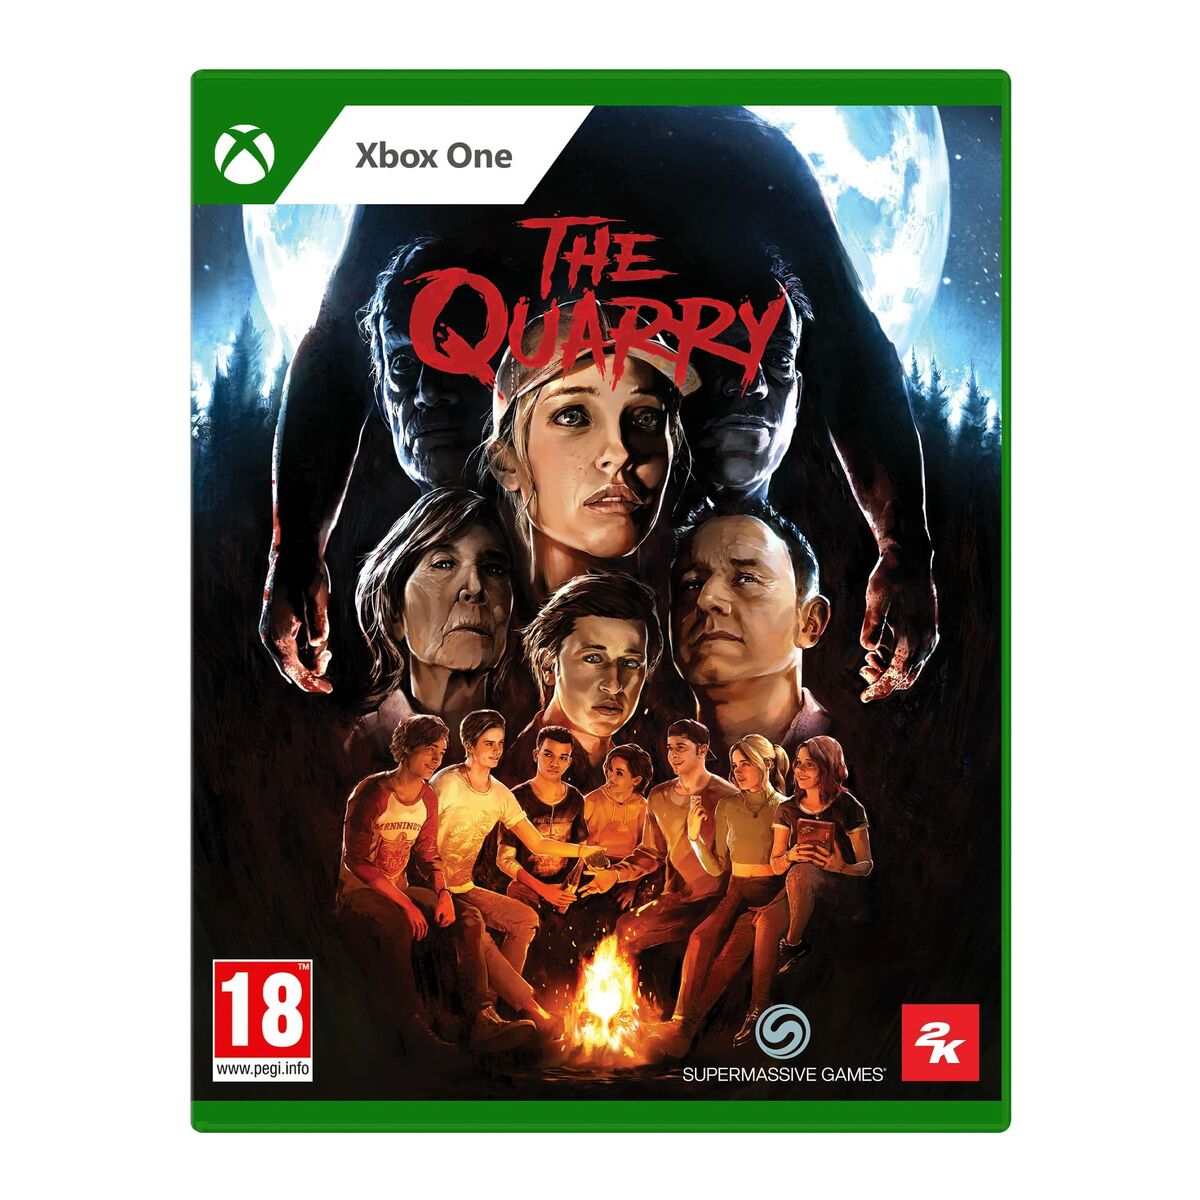 Gra wideo na Xbox One 2K GAMES The Quarry